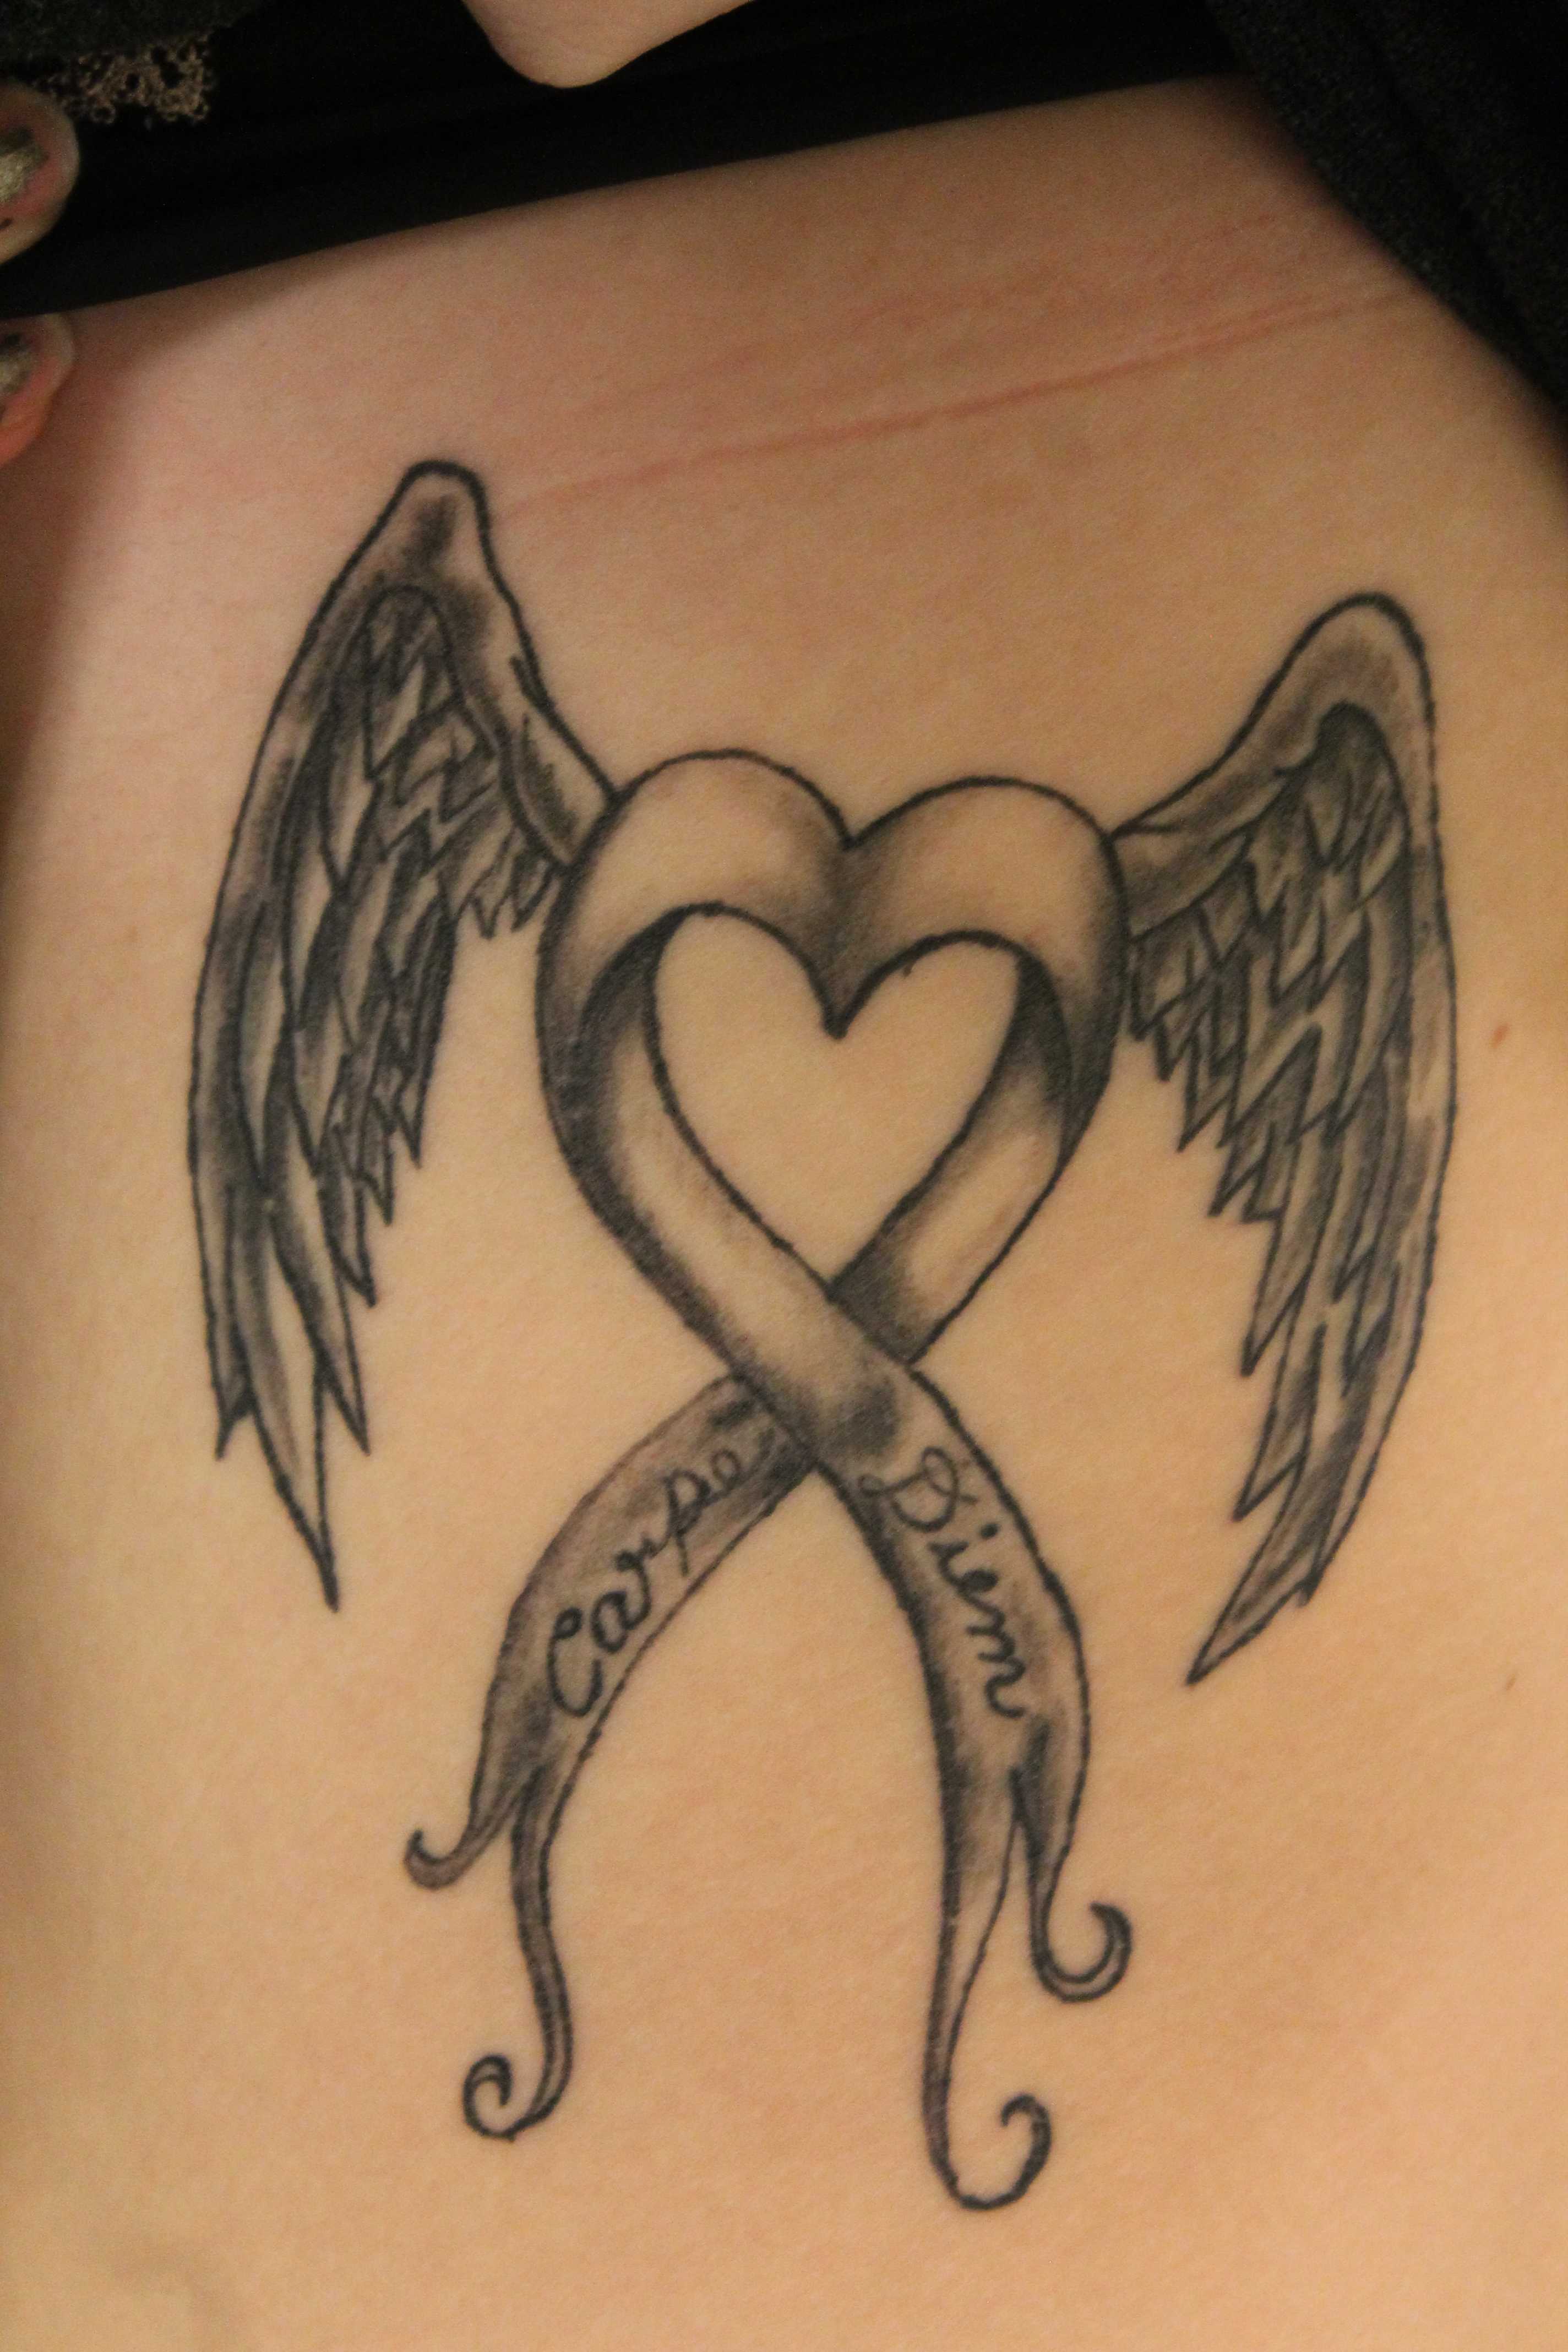 Angel Tattoo Design Studio: Cancer Tattoo Designs and meanings